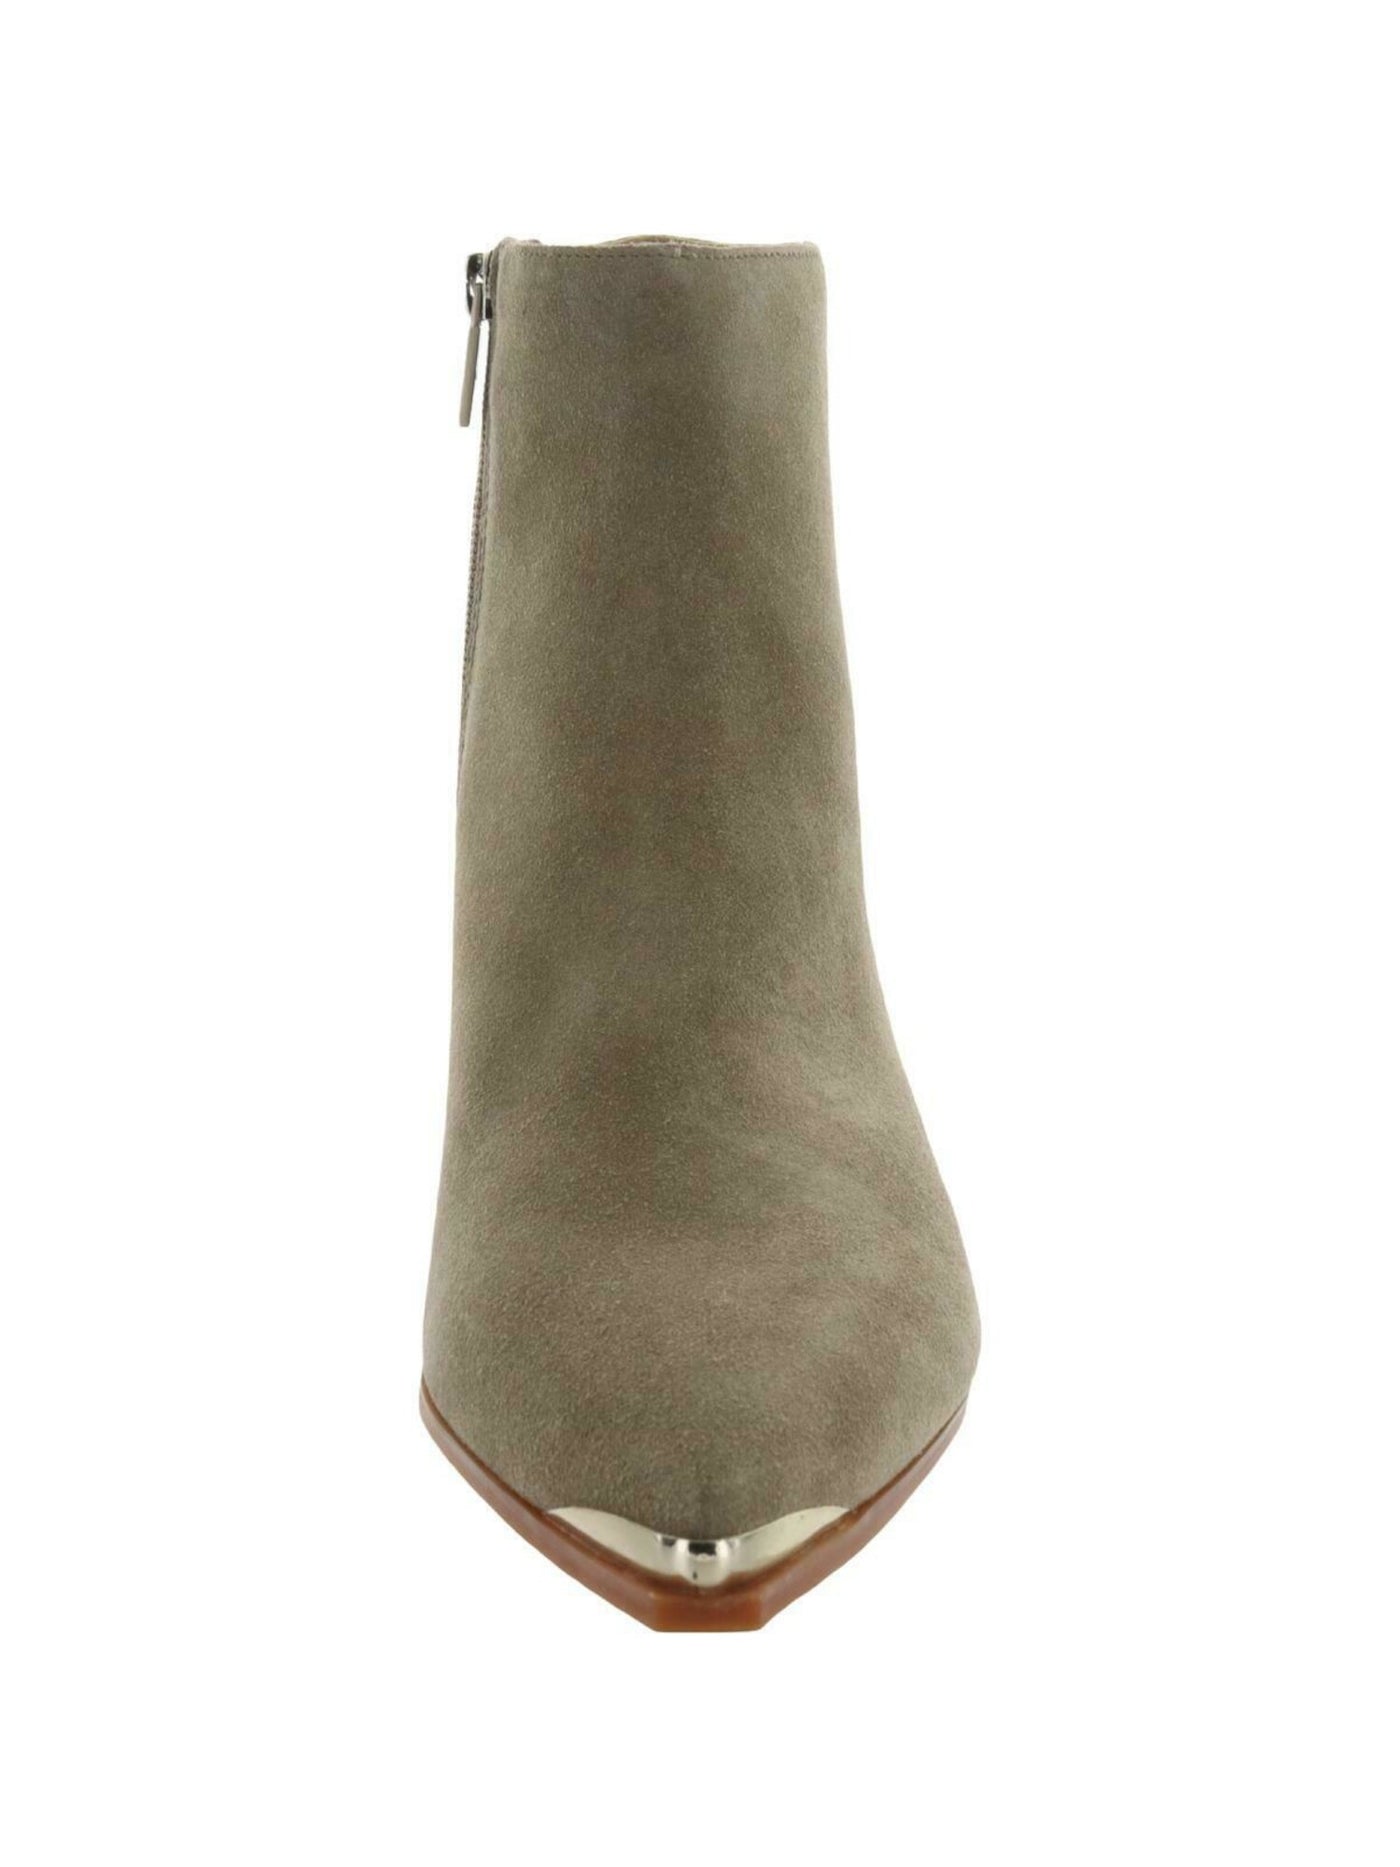 KENNETH COLE Womens Beige Plated Toe Breathable Cushioned Pointed Toe Block Heel Zip-Up Dress Booties 8